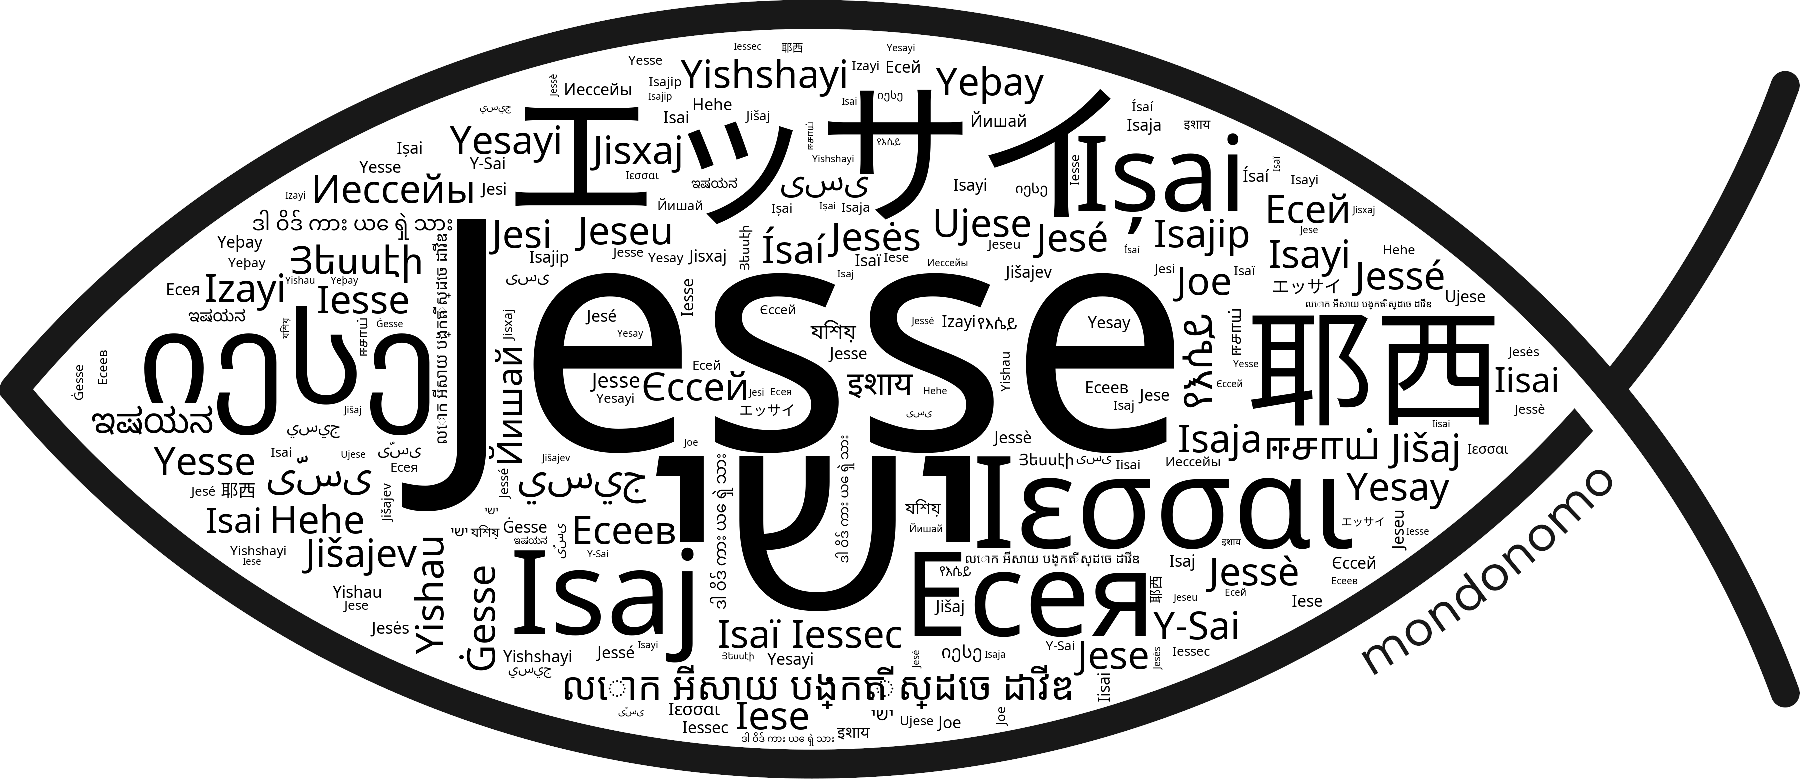 Name Jesse in the world's Bibles